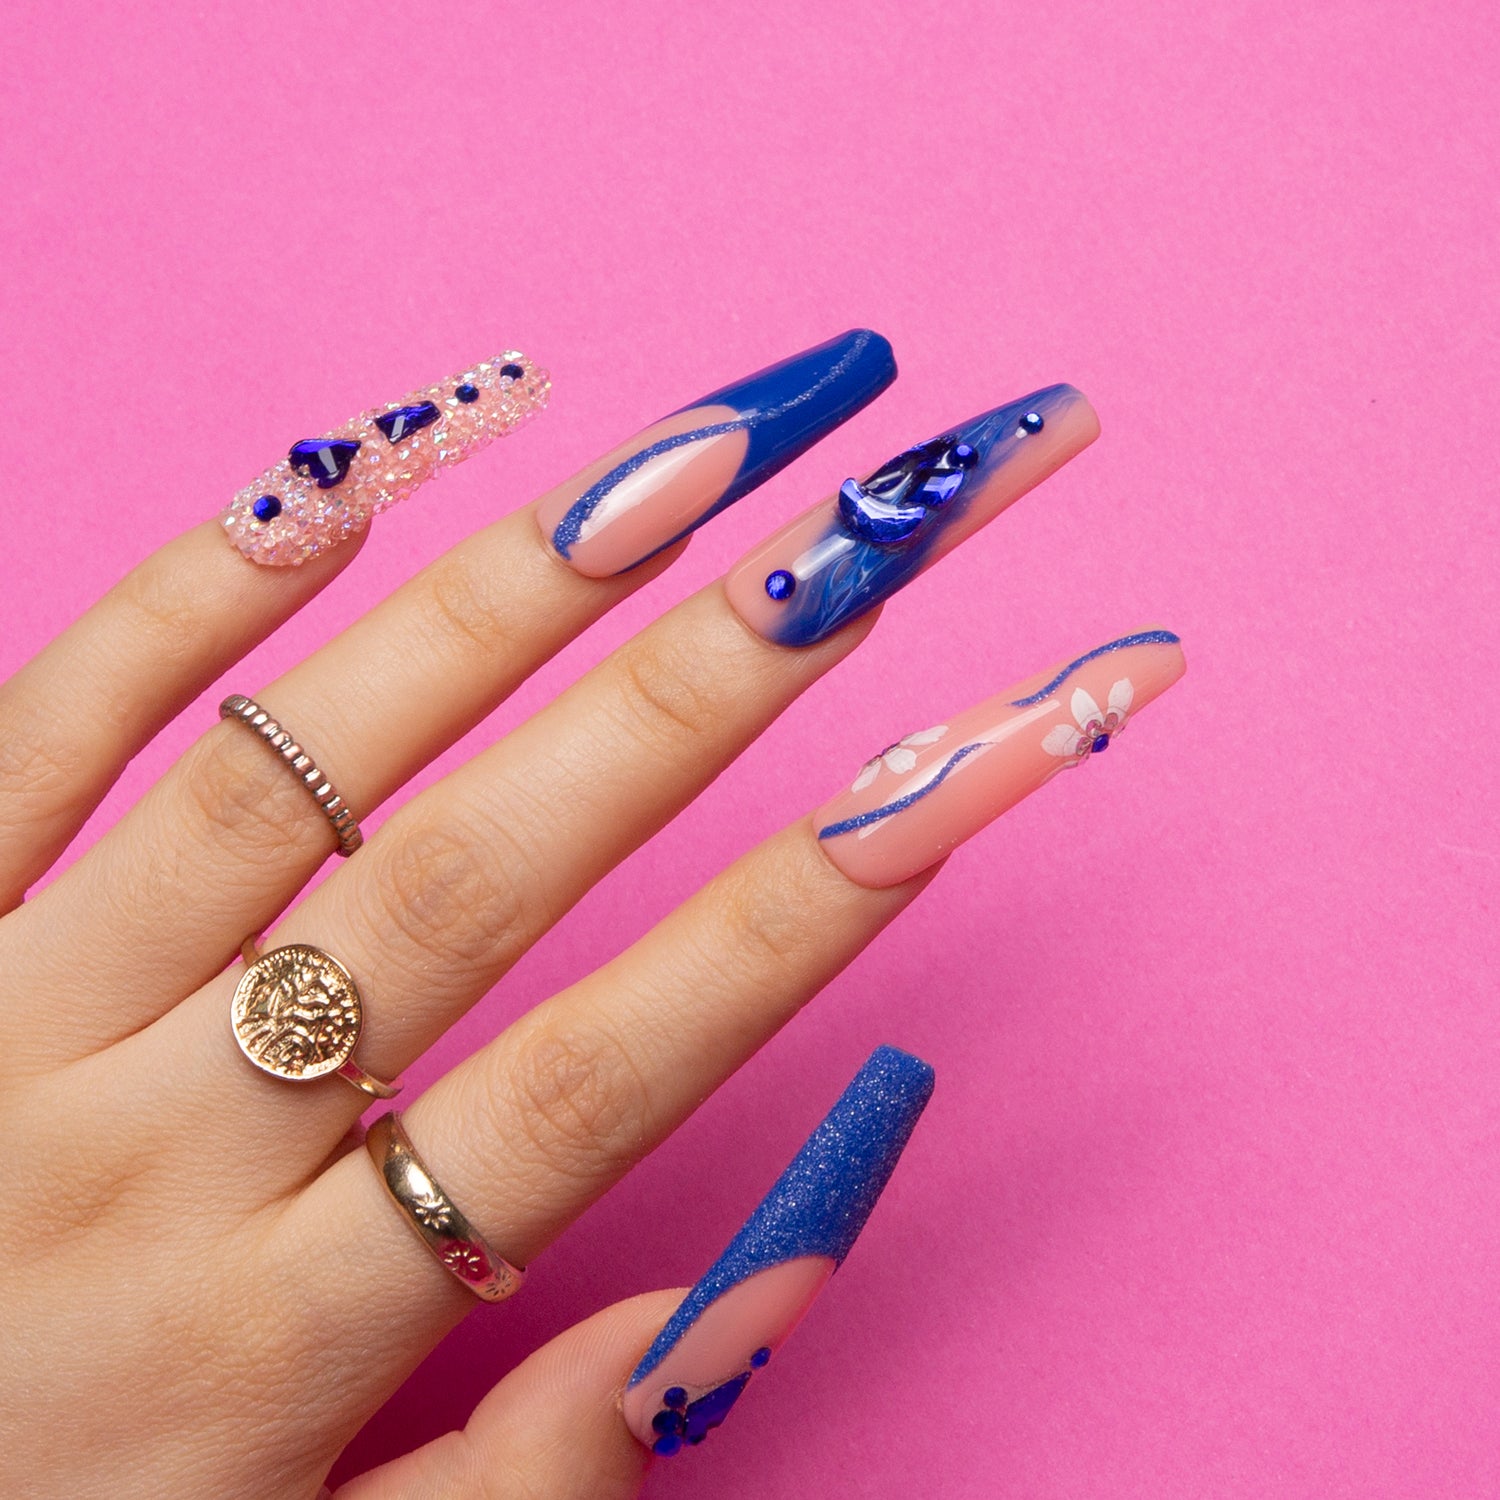 Hand showcasing Blue Suede coffin-shaped press-on nails with blue French tips, curvy lines, crystals, heart-shaped gems, sparkles, and flower designs against a pink background.